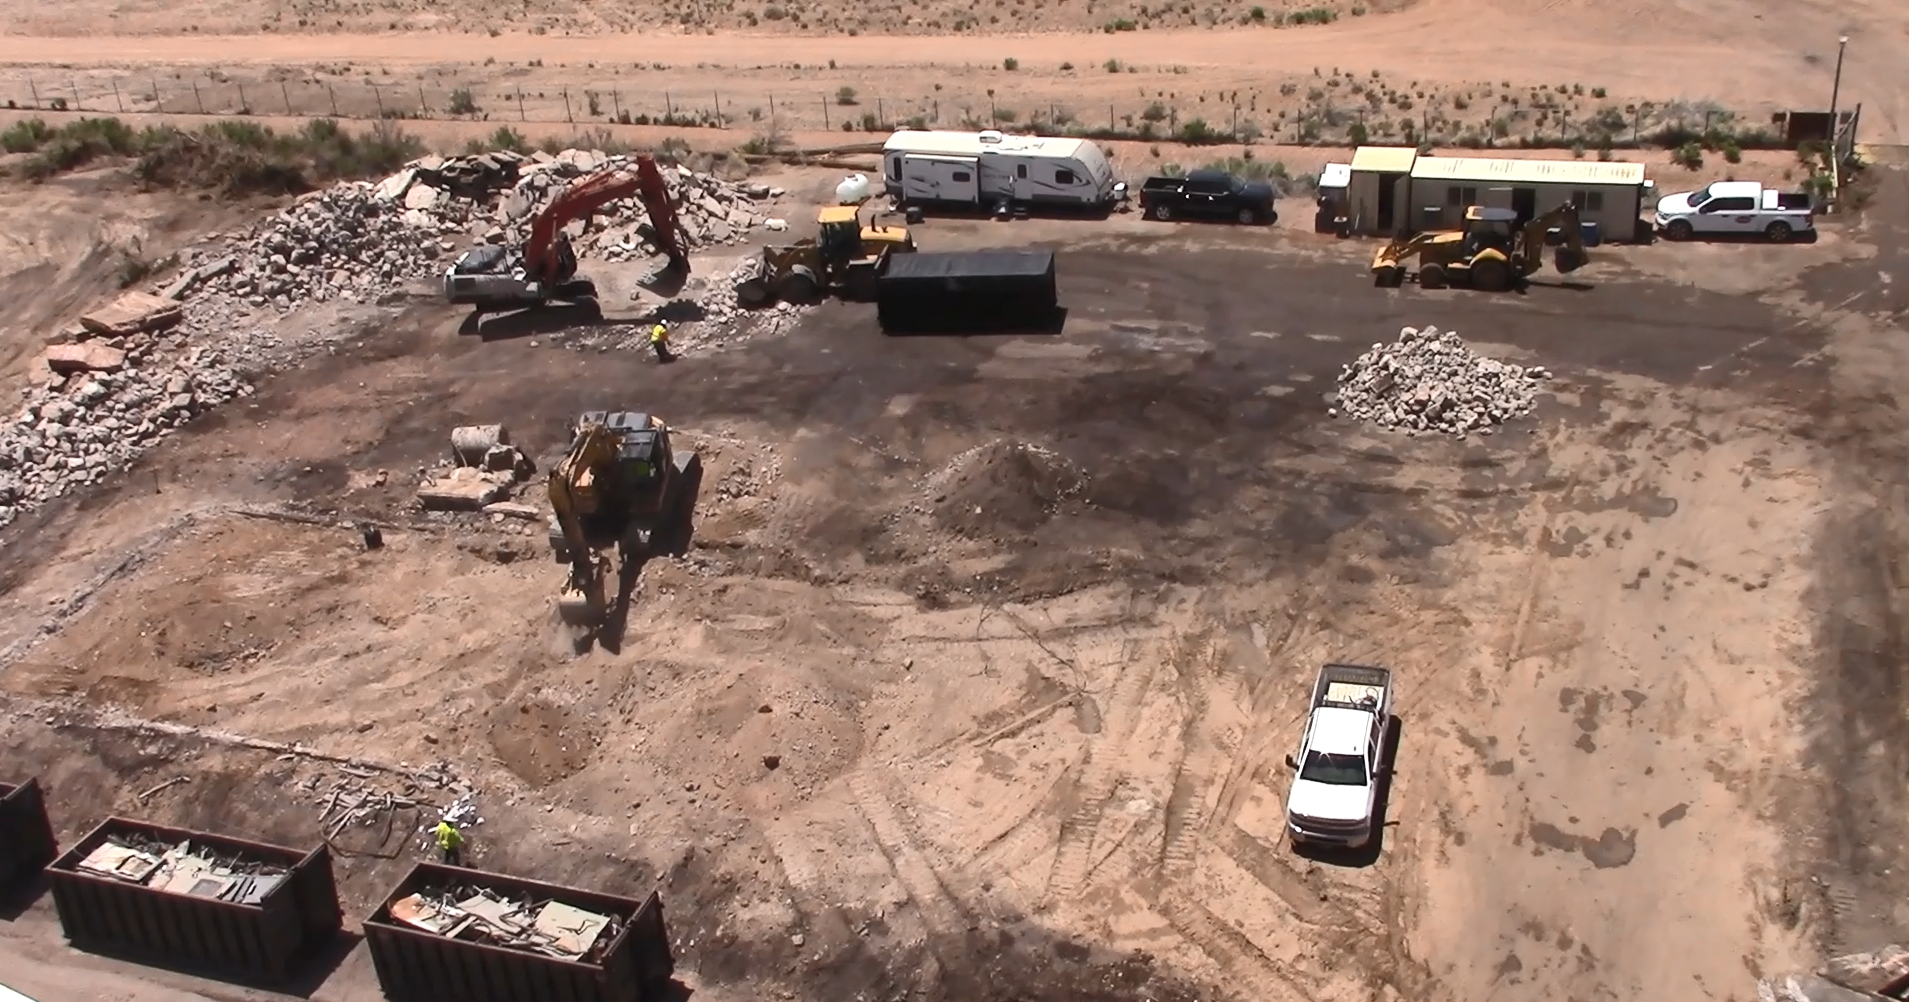 Photograph looking down on heavy machinery demolishing and removing the Black Mesa Preparation Plant buildings and facilities. 